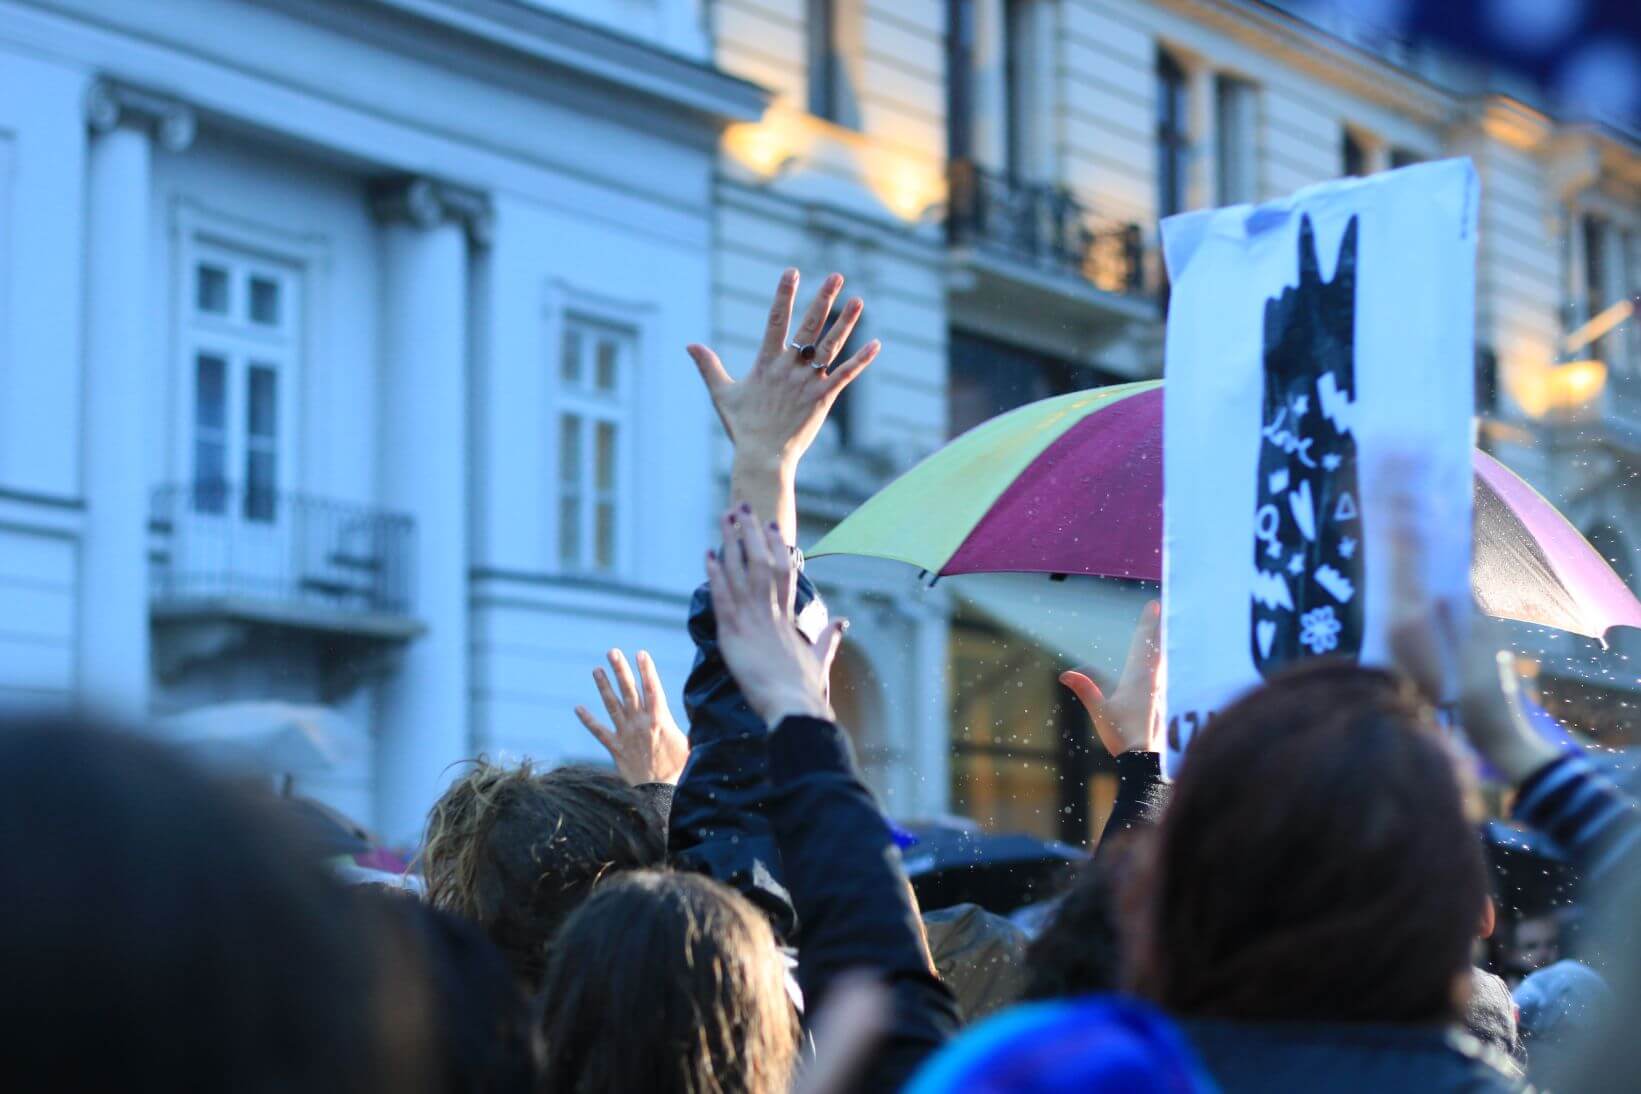 abortion-poland-protests